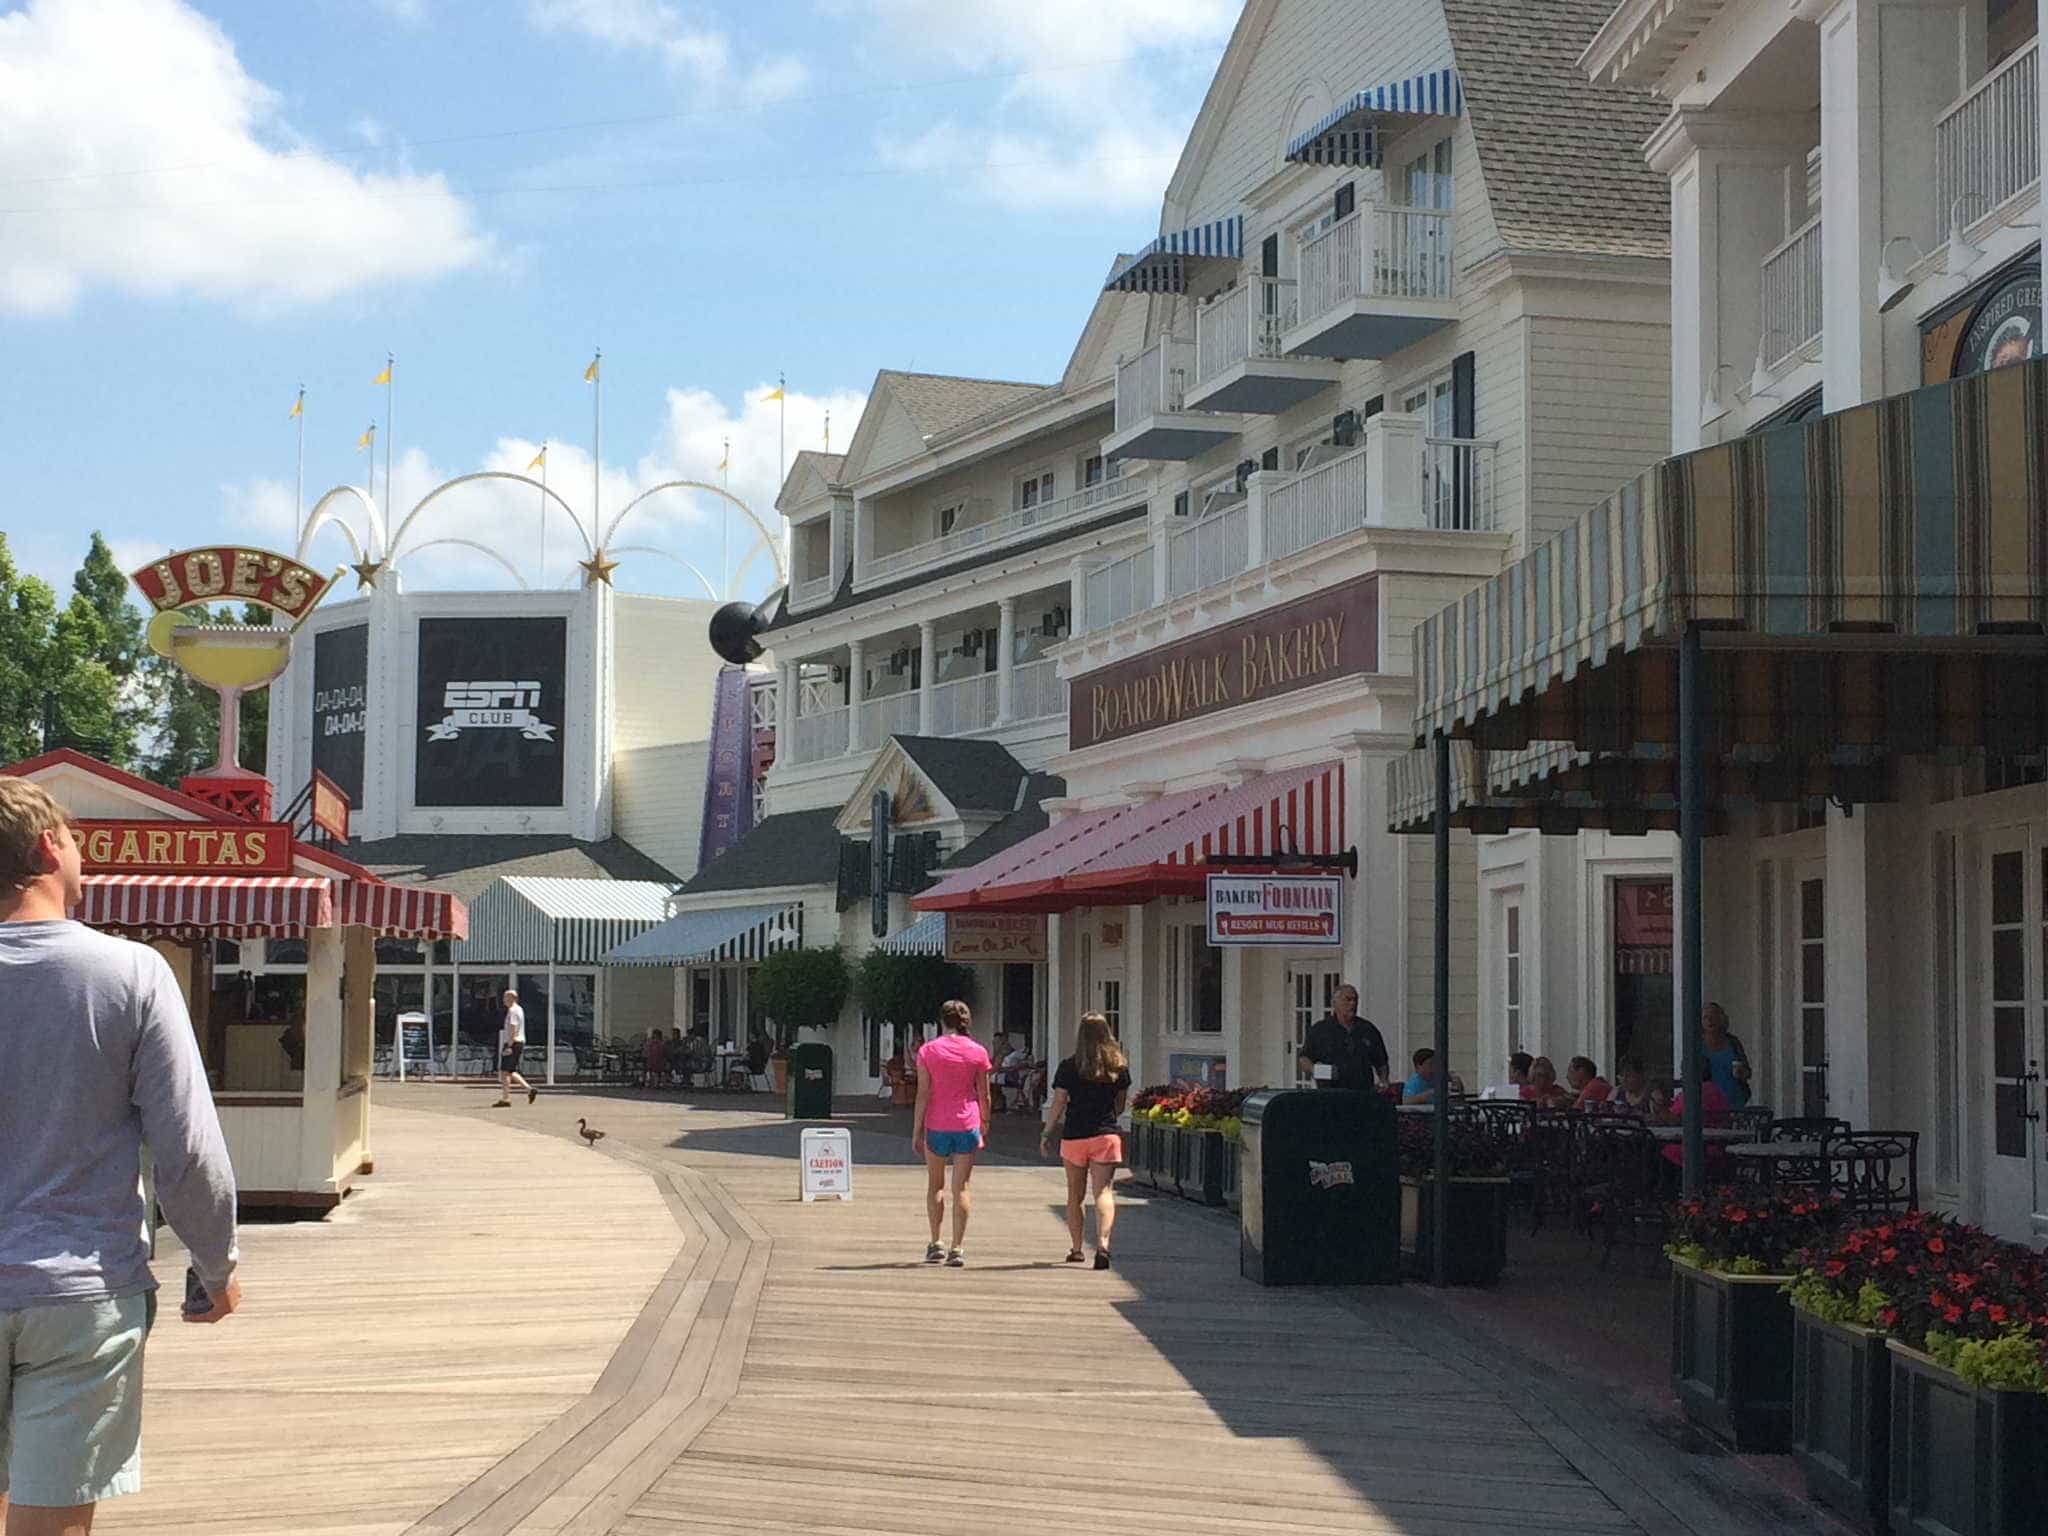 RESORT REVIEW: Disney's Boardwalk Inn Hits Just the Right Notes - WDW